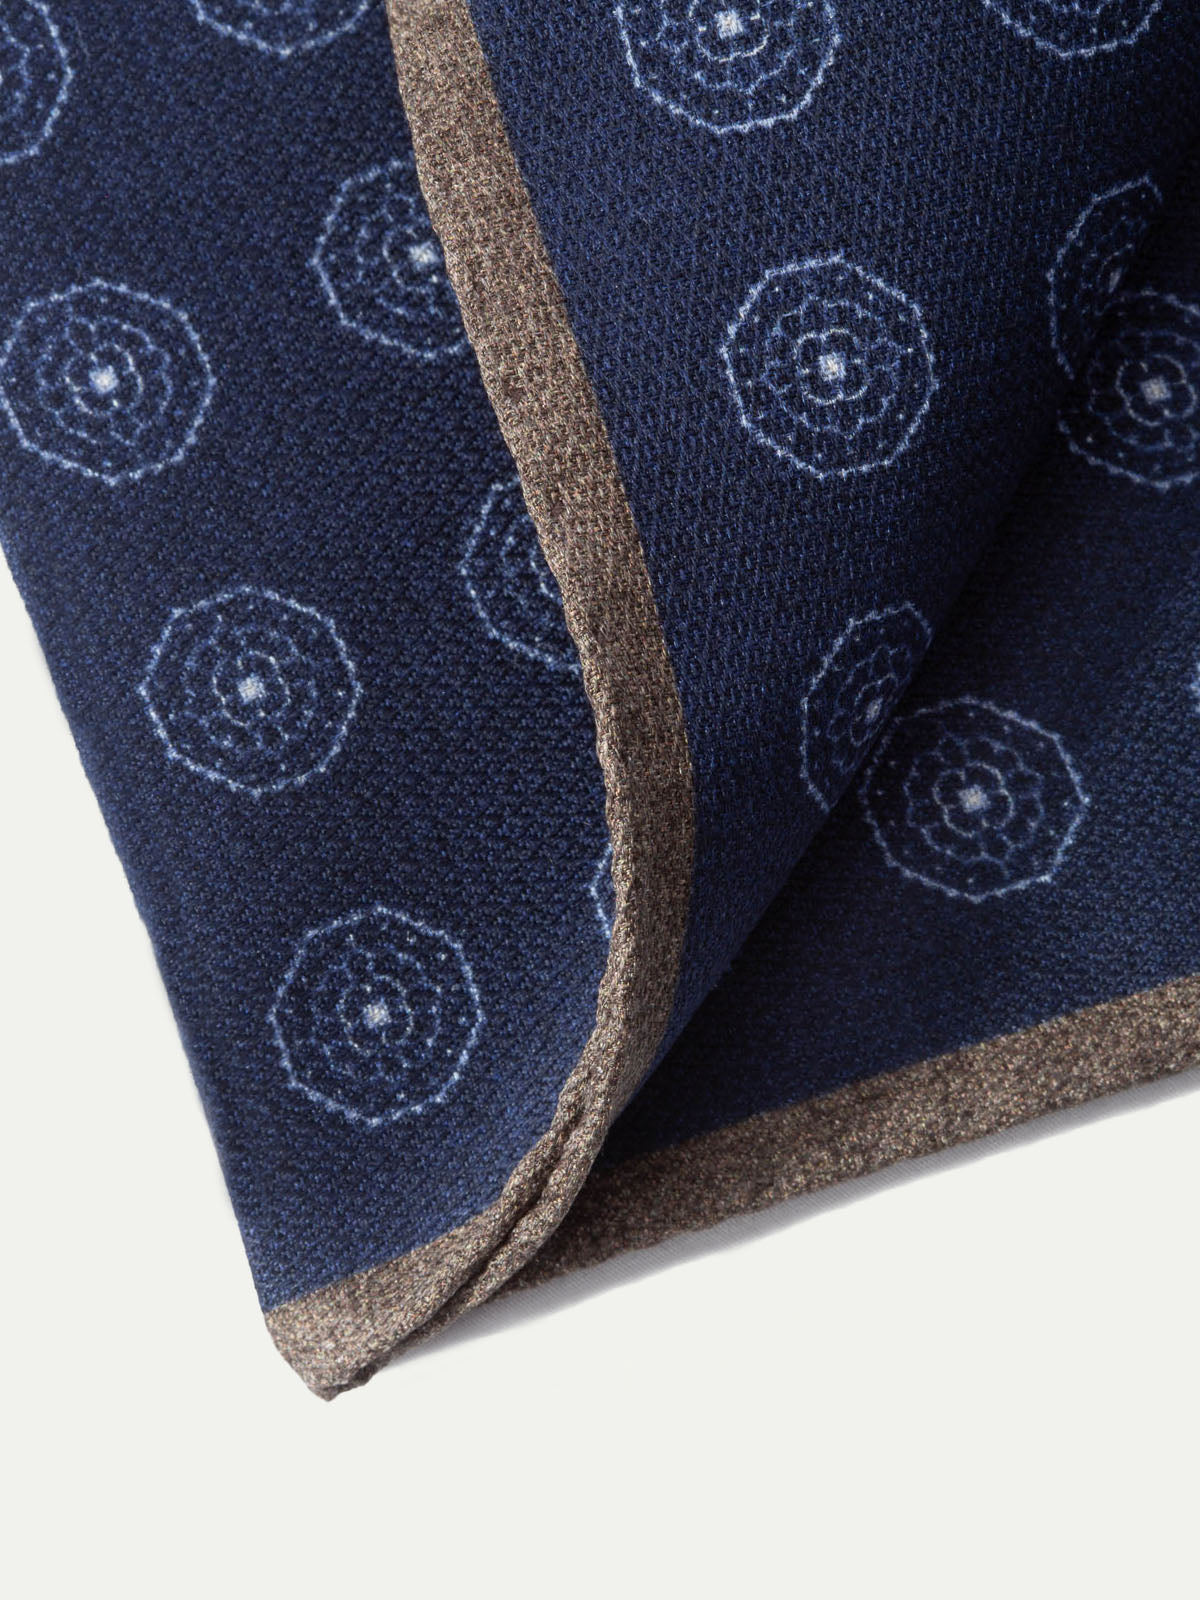 Blue and brown reversible pocket square - Made in Italy